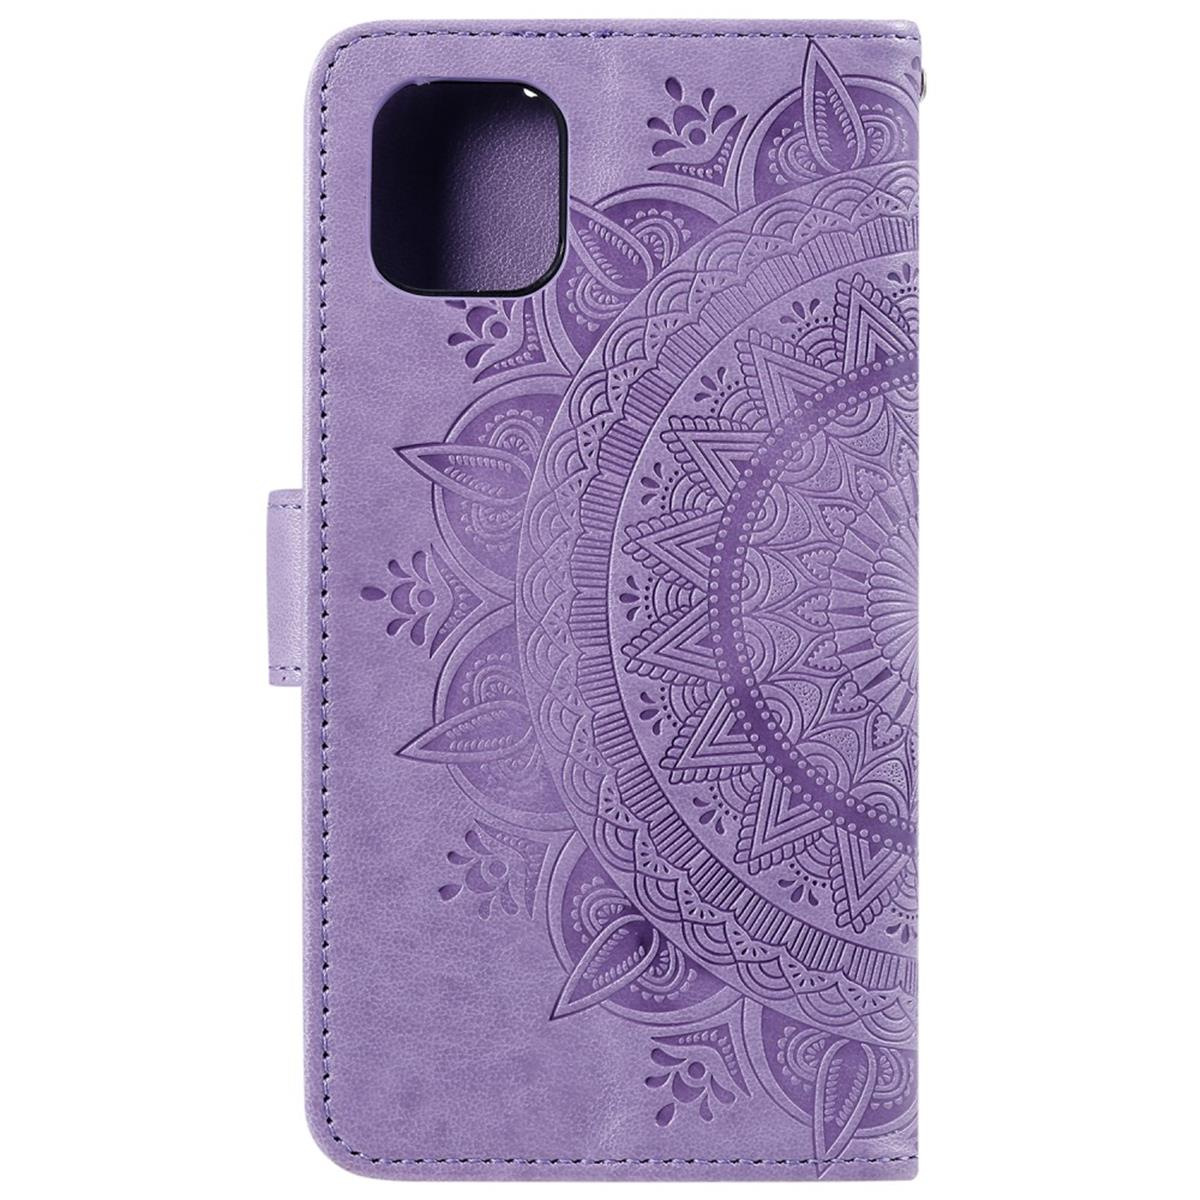 COVERKINGZ Klapphülle mit Apple, Muster, 11, Mandala Lila iPhone Bookcover